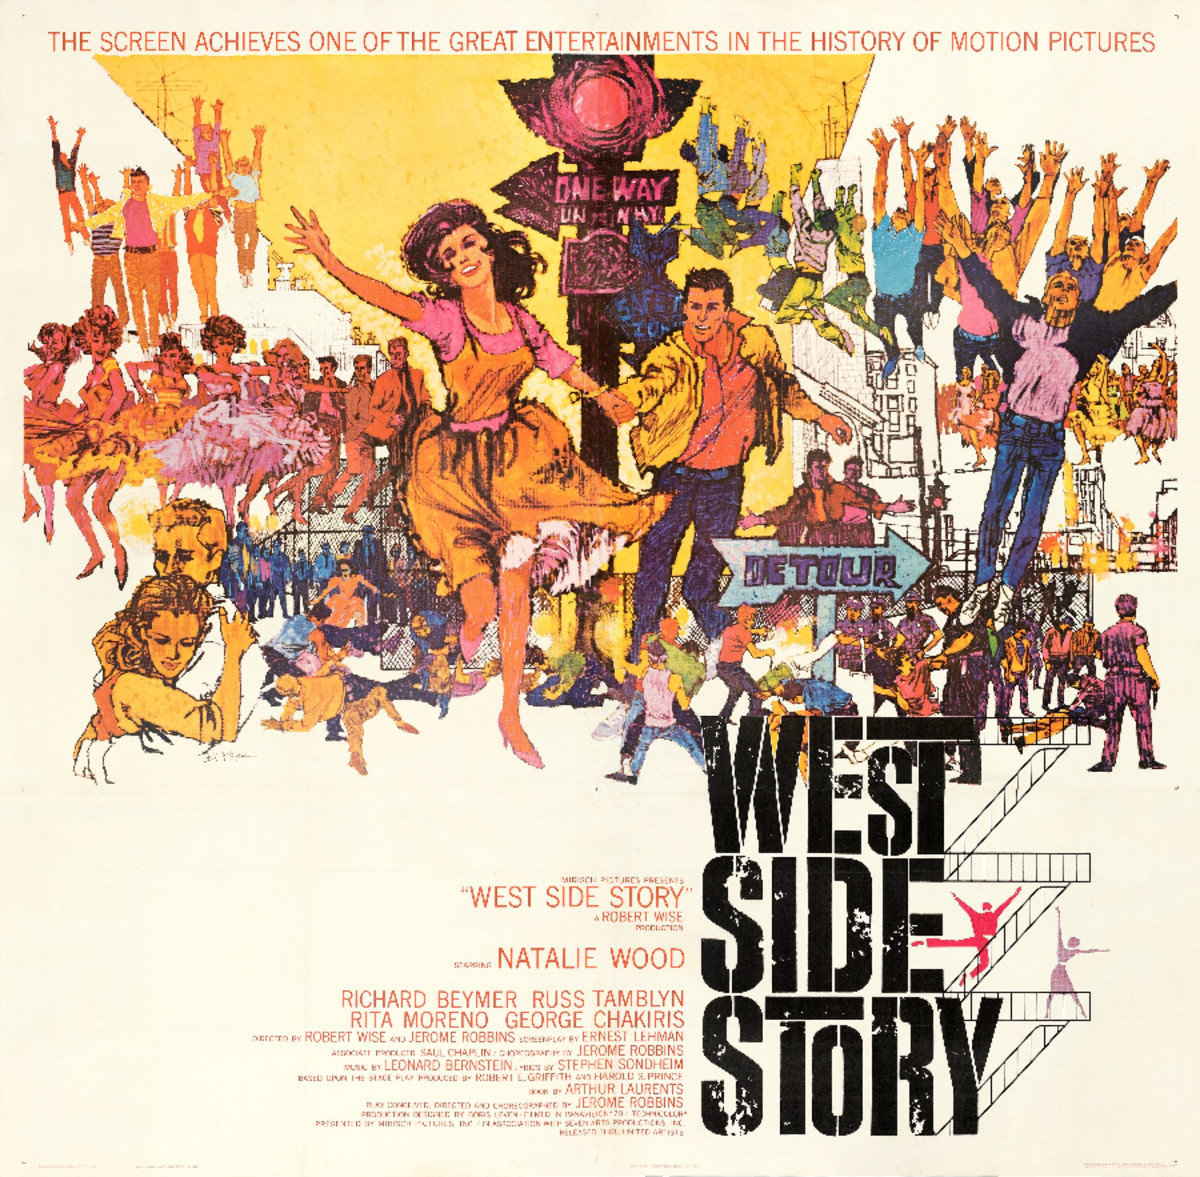 Robert Peak's artwork for the movie poster for West Side Story (United Artists, 1961). This sold at Heritage Auctions in March for $2,640.